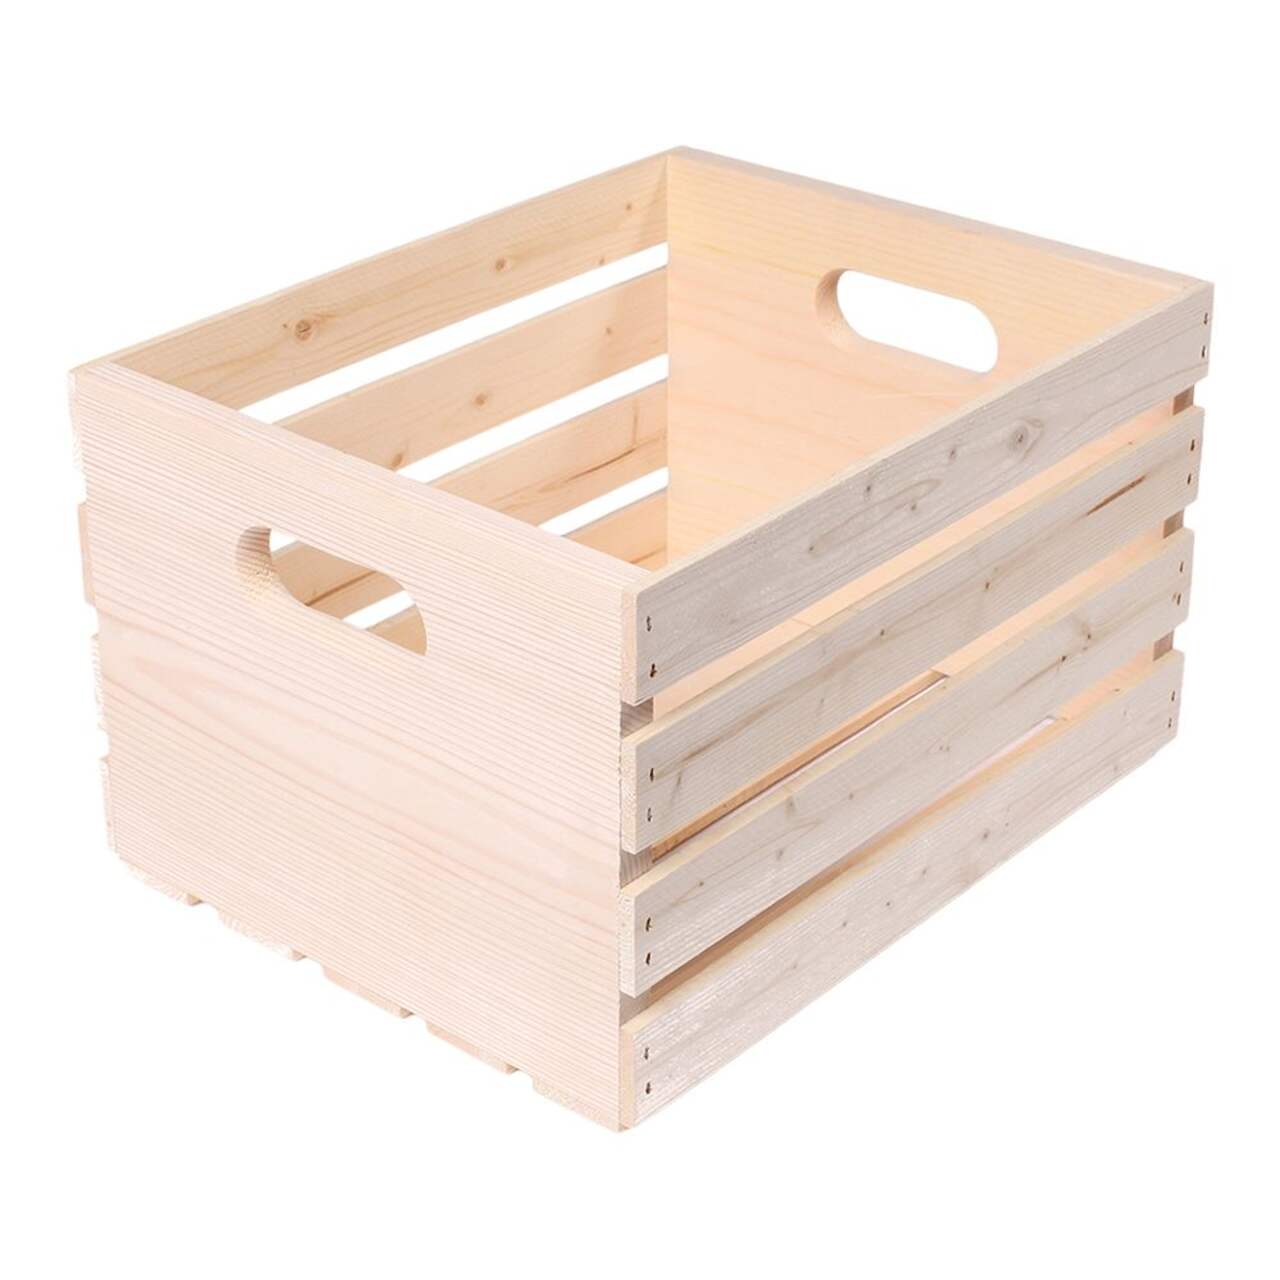 https://media-www.canadiantire.ca/product/living/home-organization/storage-solutions/1424915/wooden-storage-crate-1dc733b1-9a20-4a6a-9e29-7f45feac0140-jpgrendition.jpg?imdensity=1&imwidth=640&impolicy=mZoom